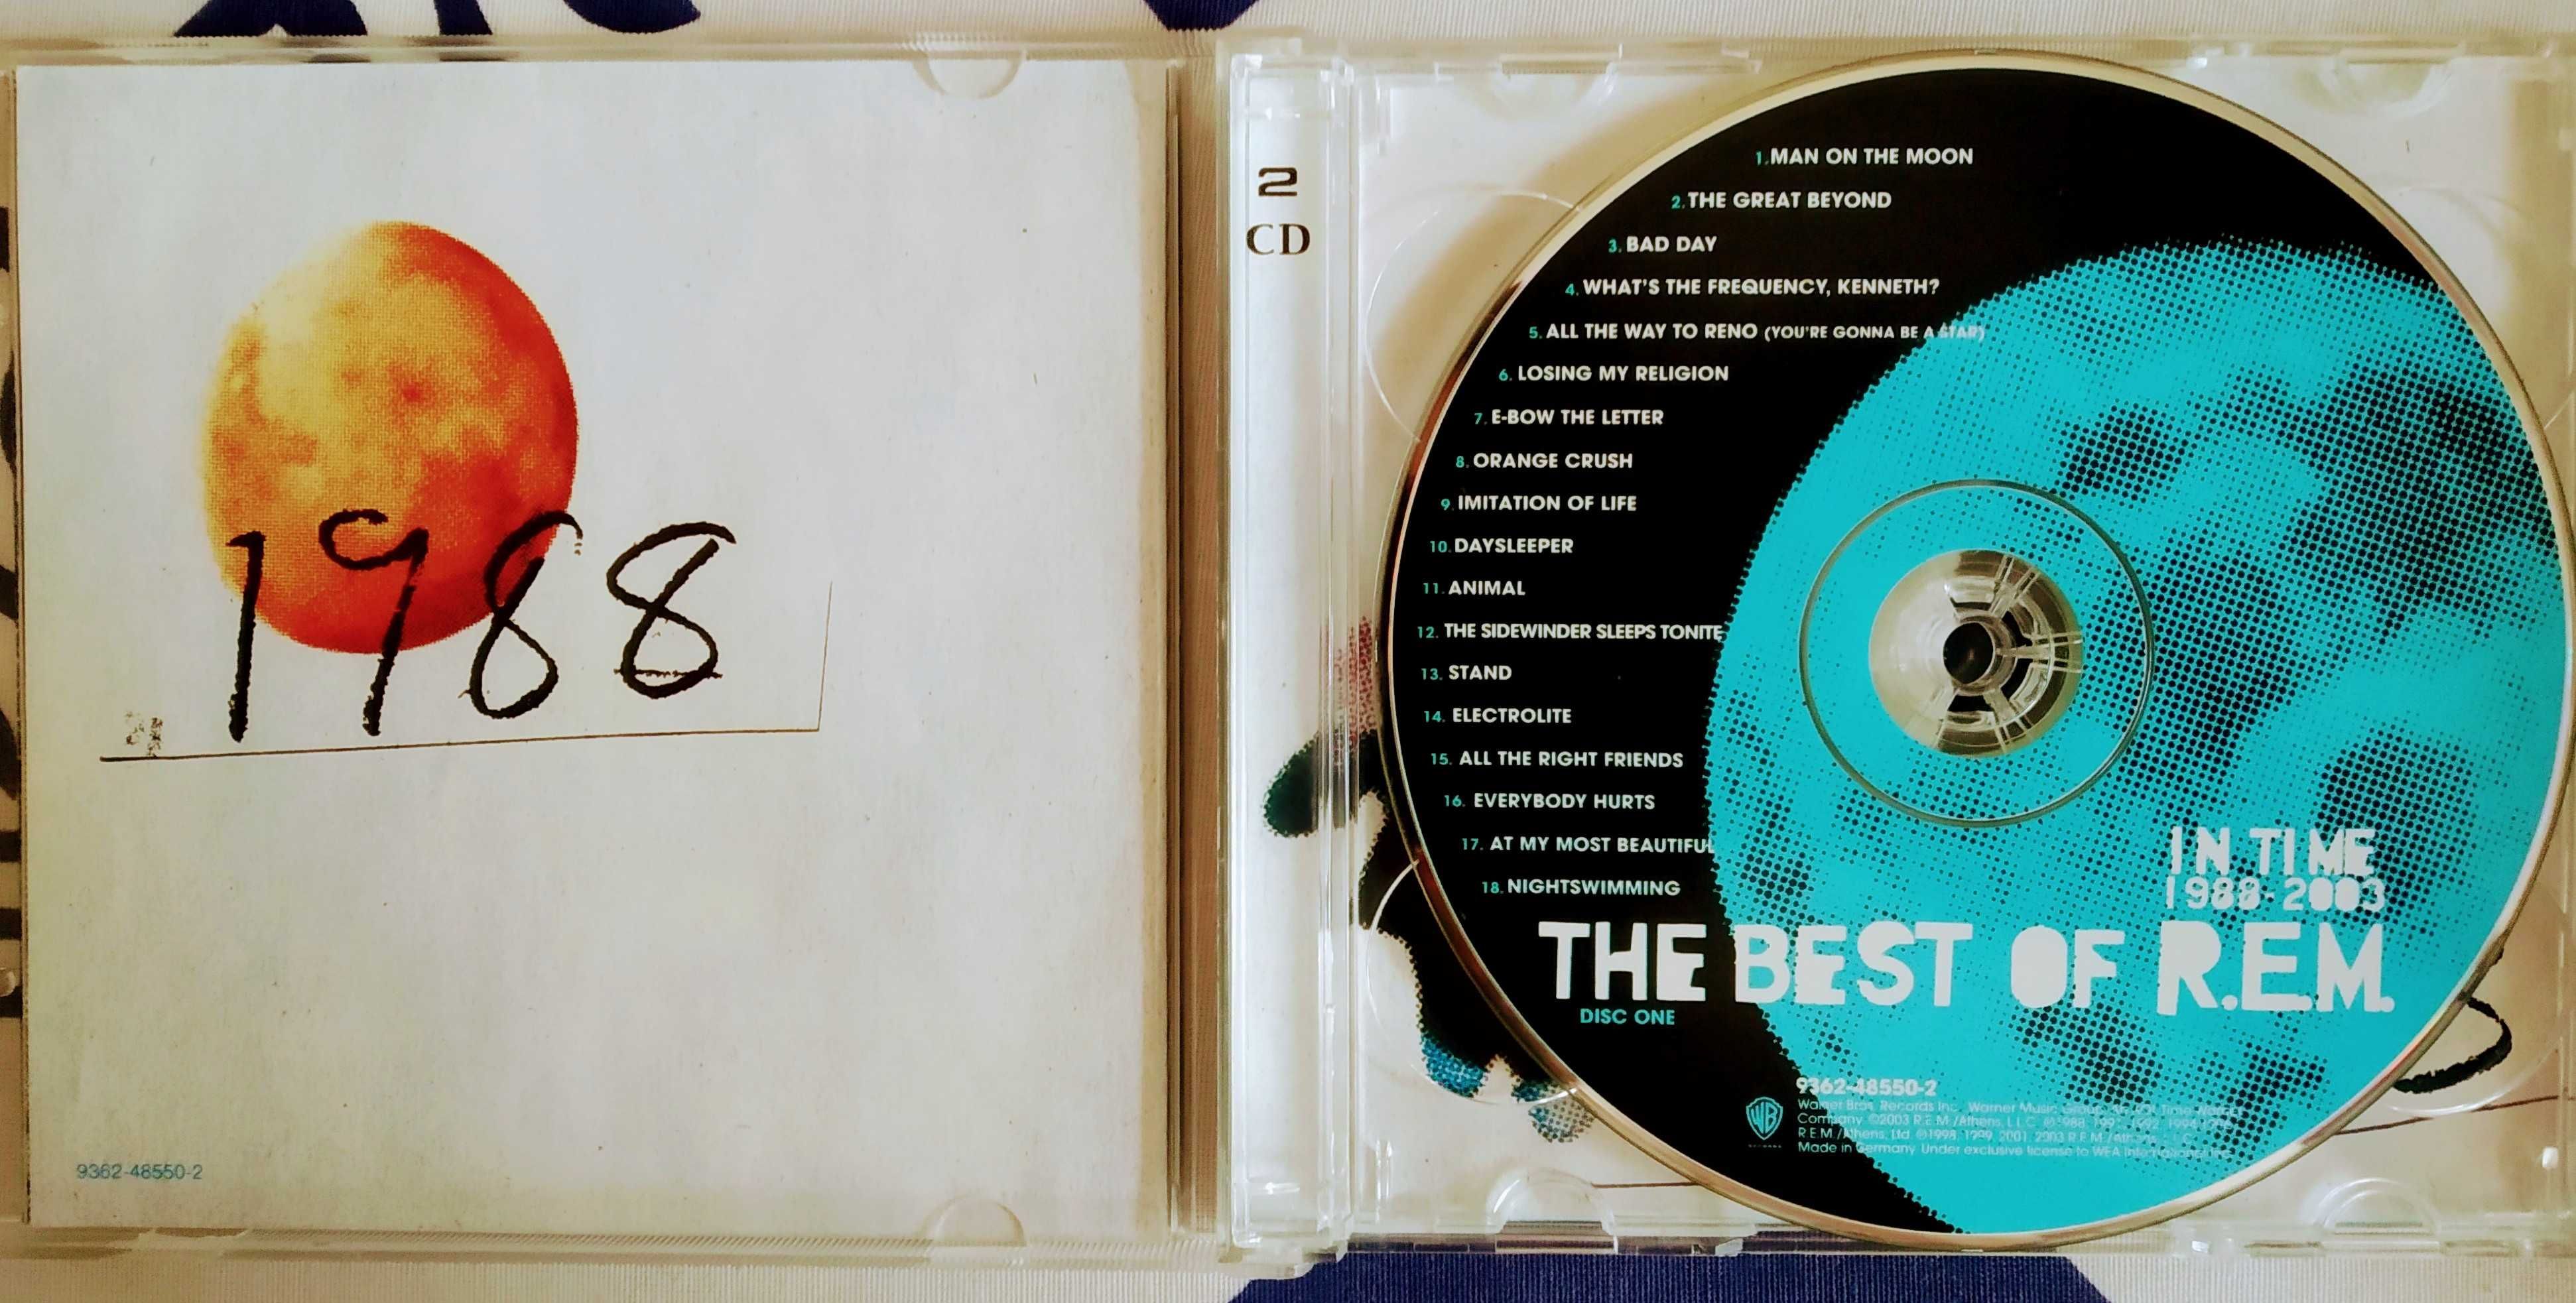 2 CD Complitation R.E.M. " The Best Of R.E.M. In Time " (1988-2003)